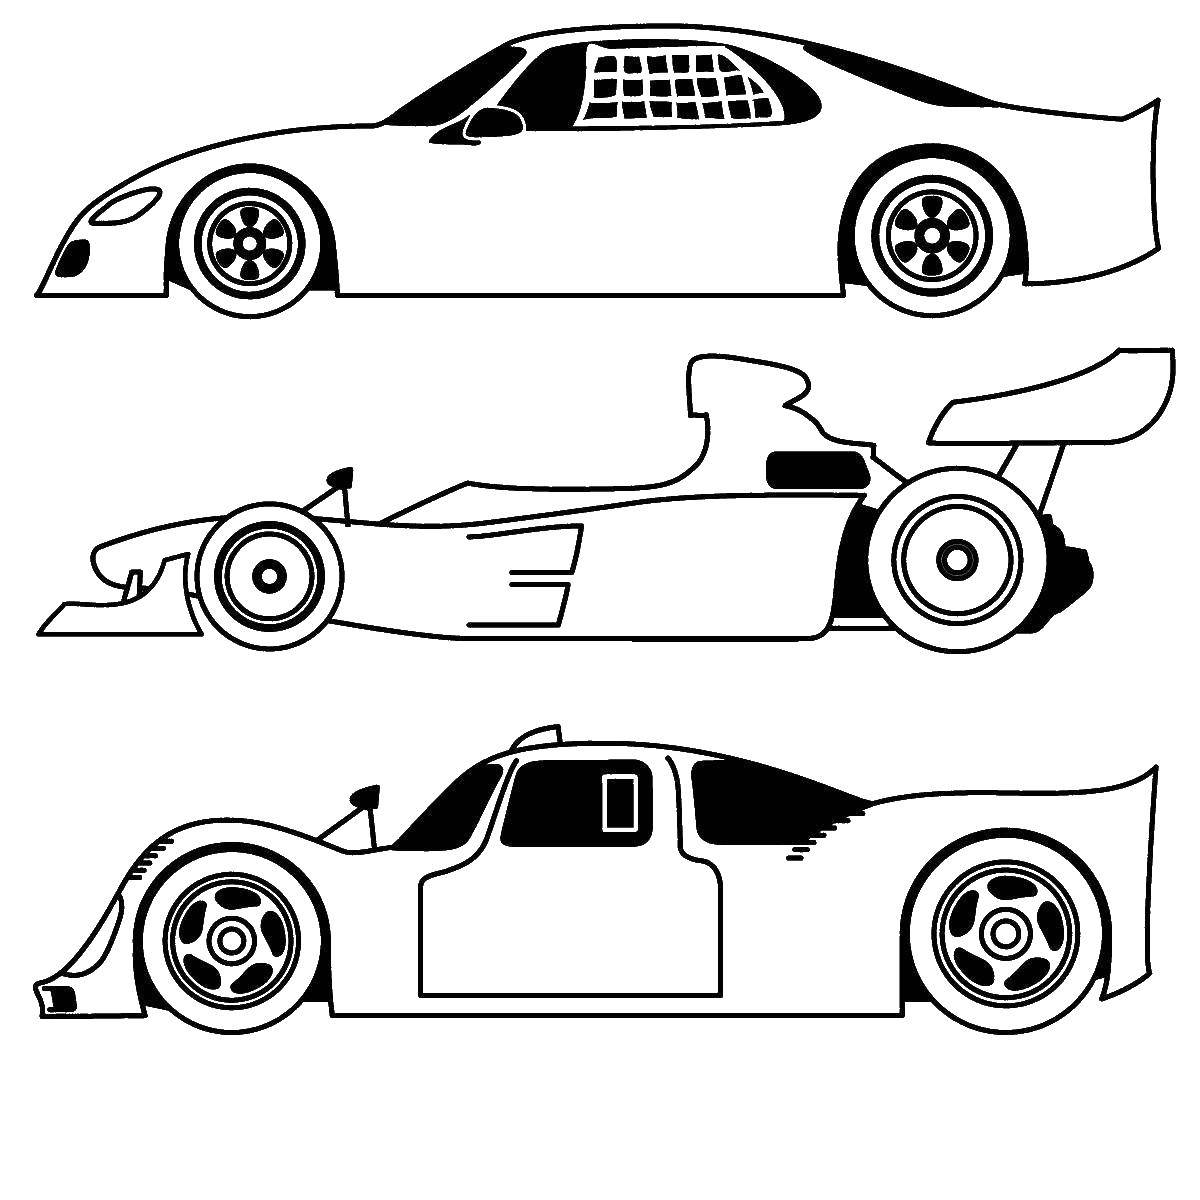 Coloring Racing cars. Category machine . Tags:  cars, trucks, sports cars.